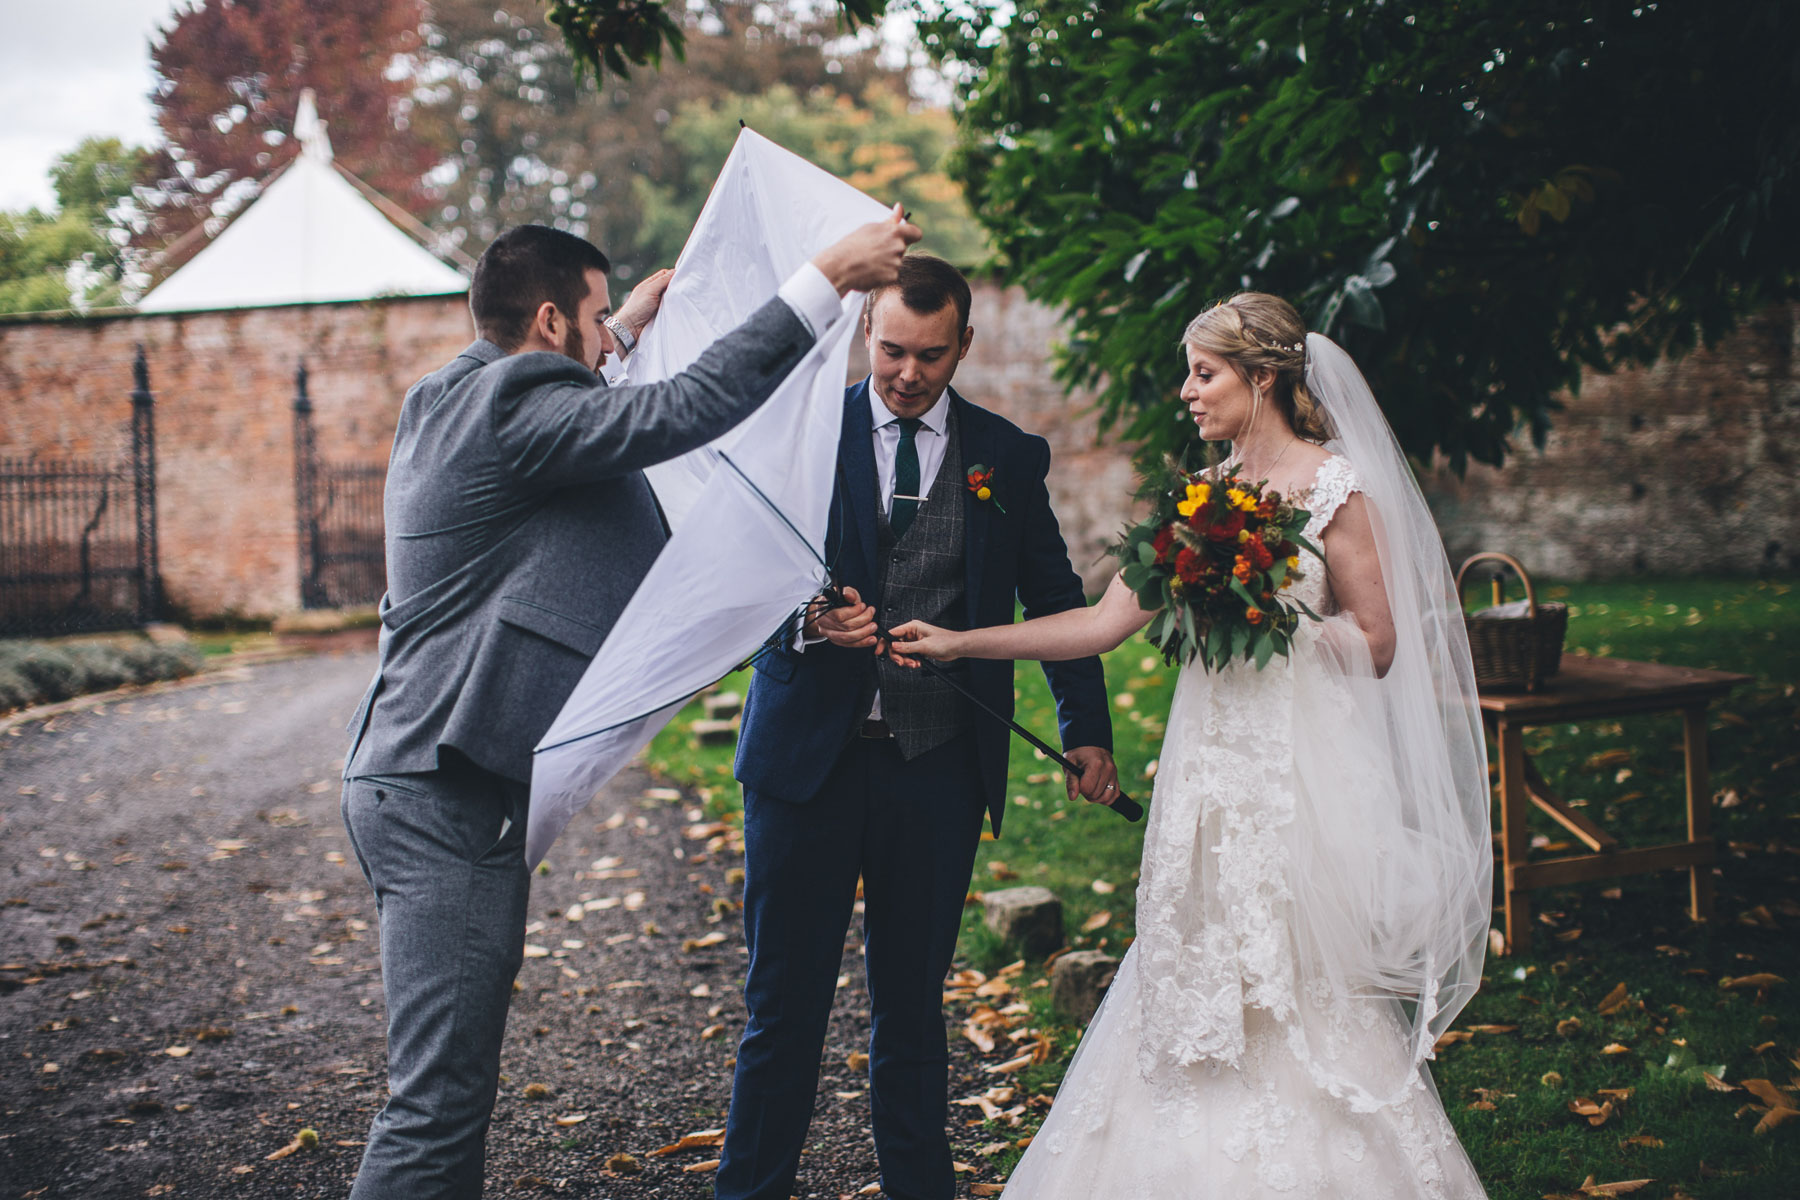 umbrella turns inside out on bride and groom